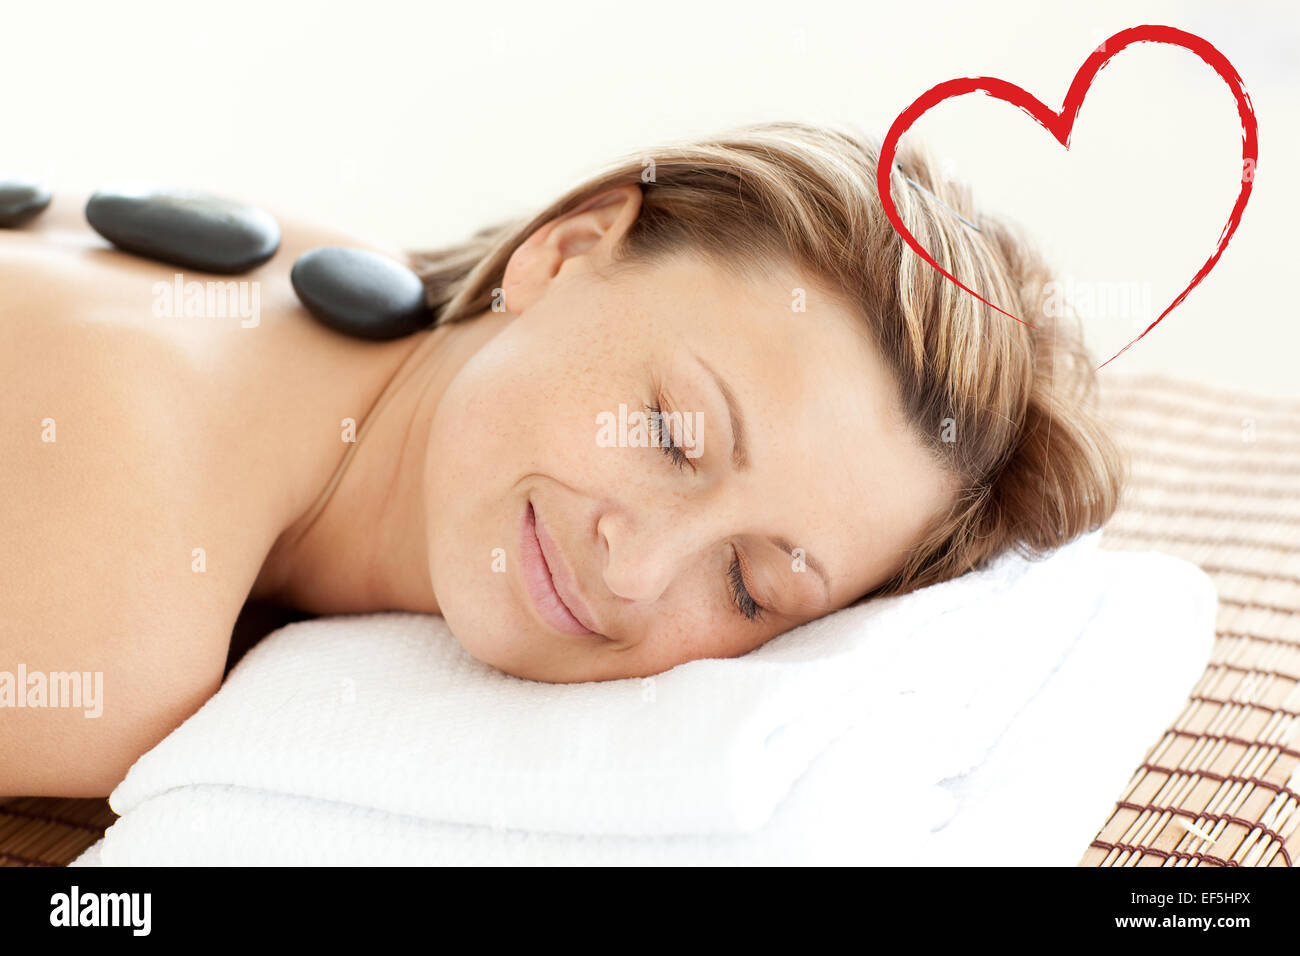 Composite image of beautiful woman receiving a spa treatment Stock Photo